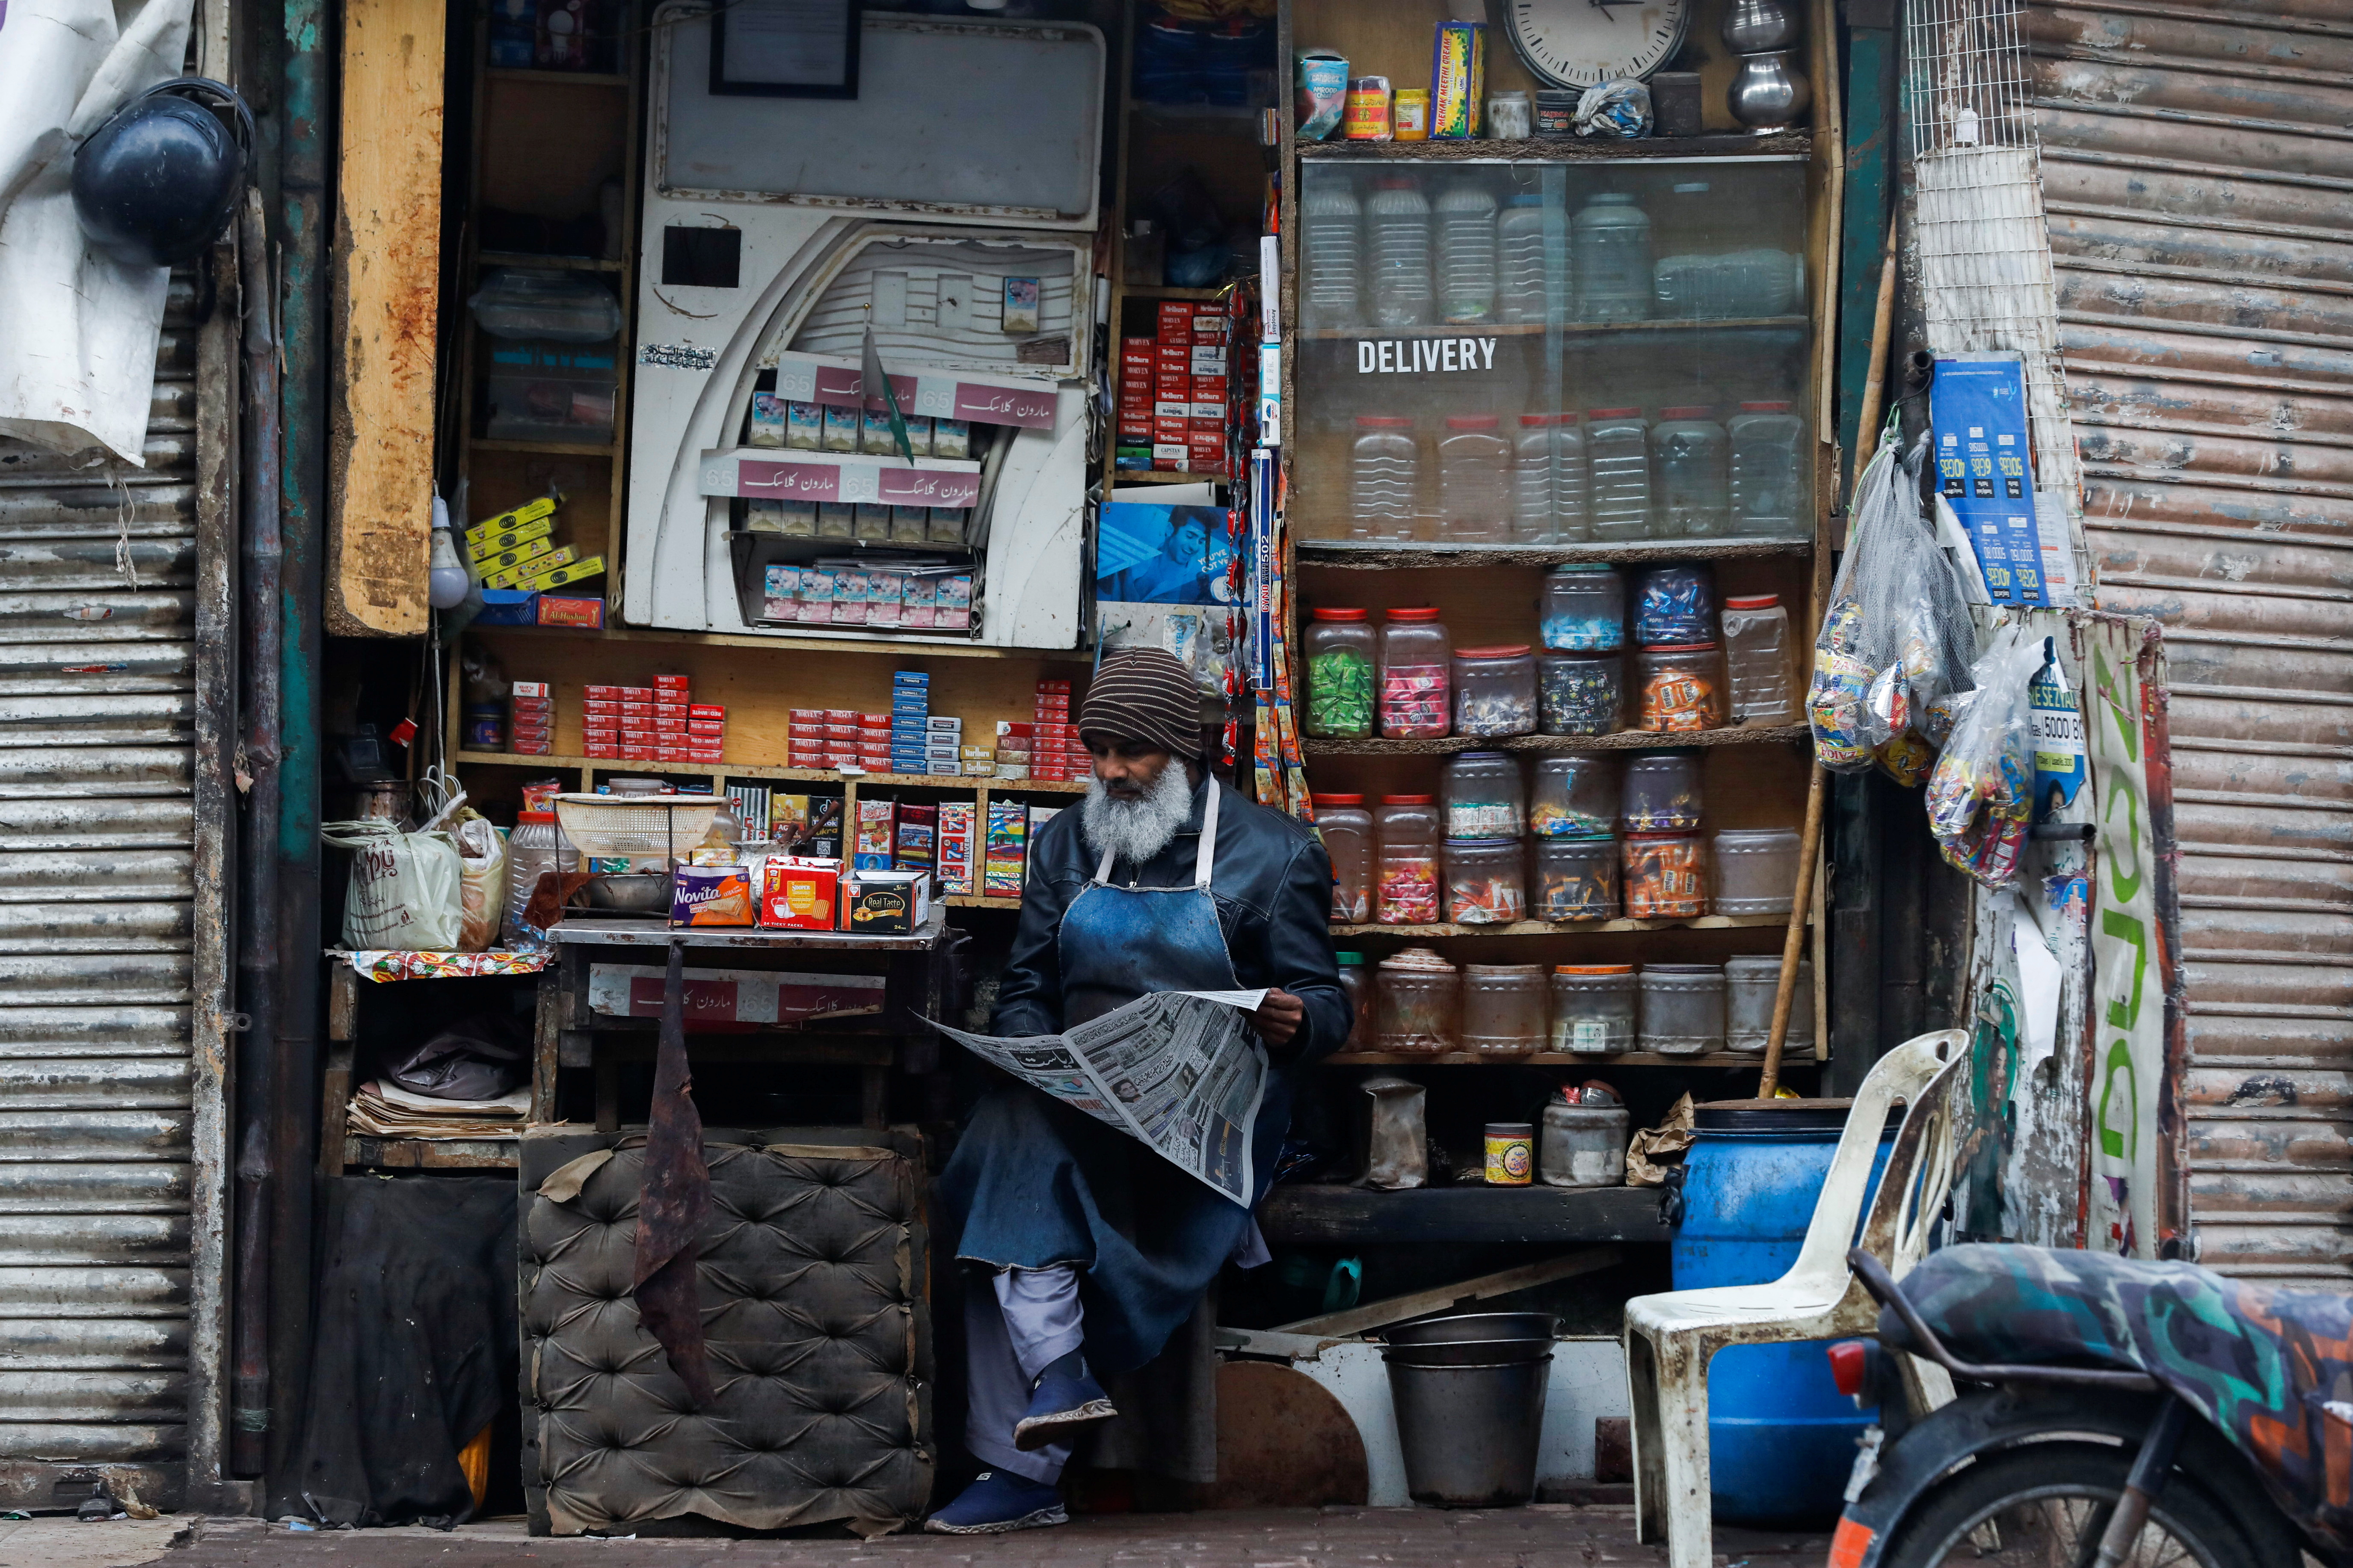 A man reads newspaper while selling betel leaves, cigarettes and candies from a shop in Karachi